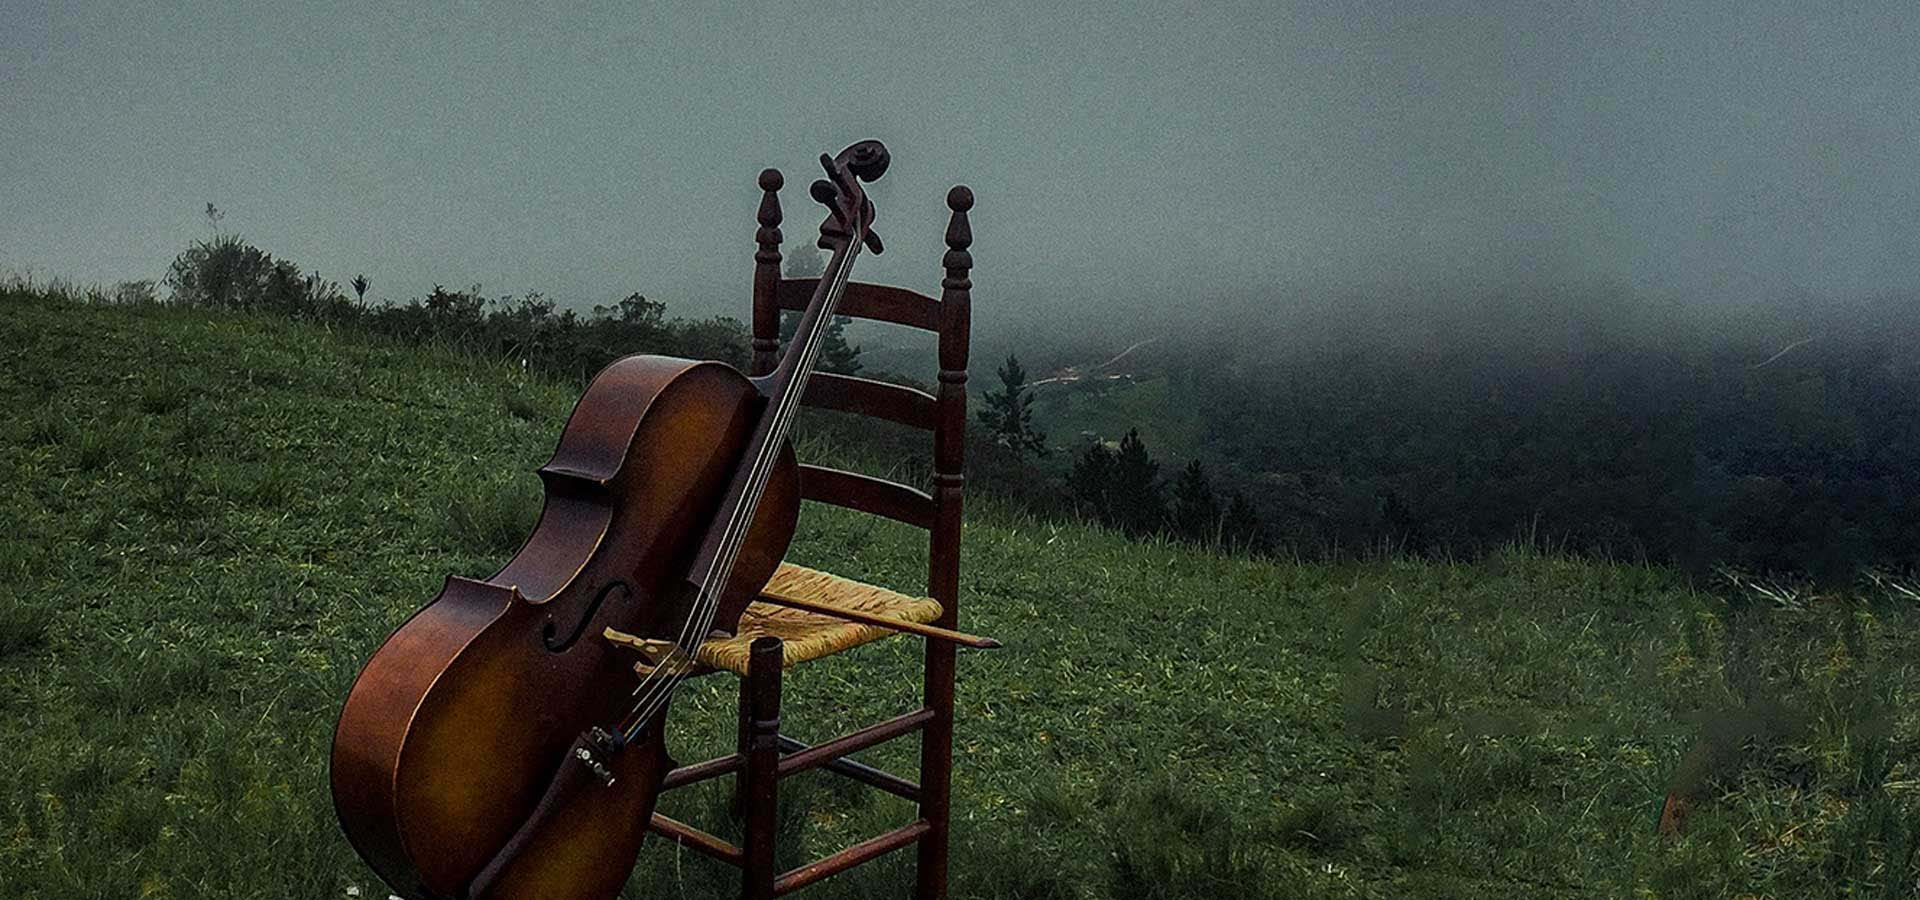 Foggy meadow with a chair and cello arranged for dramatic effect.